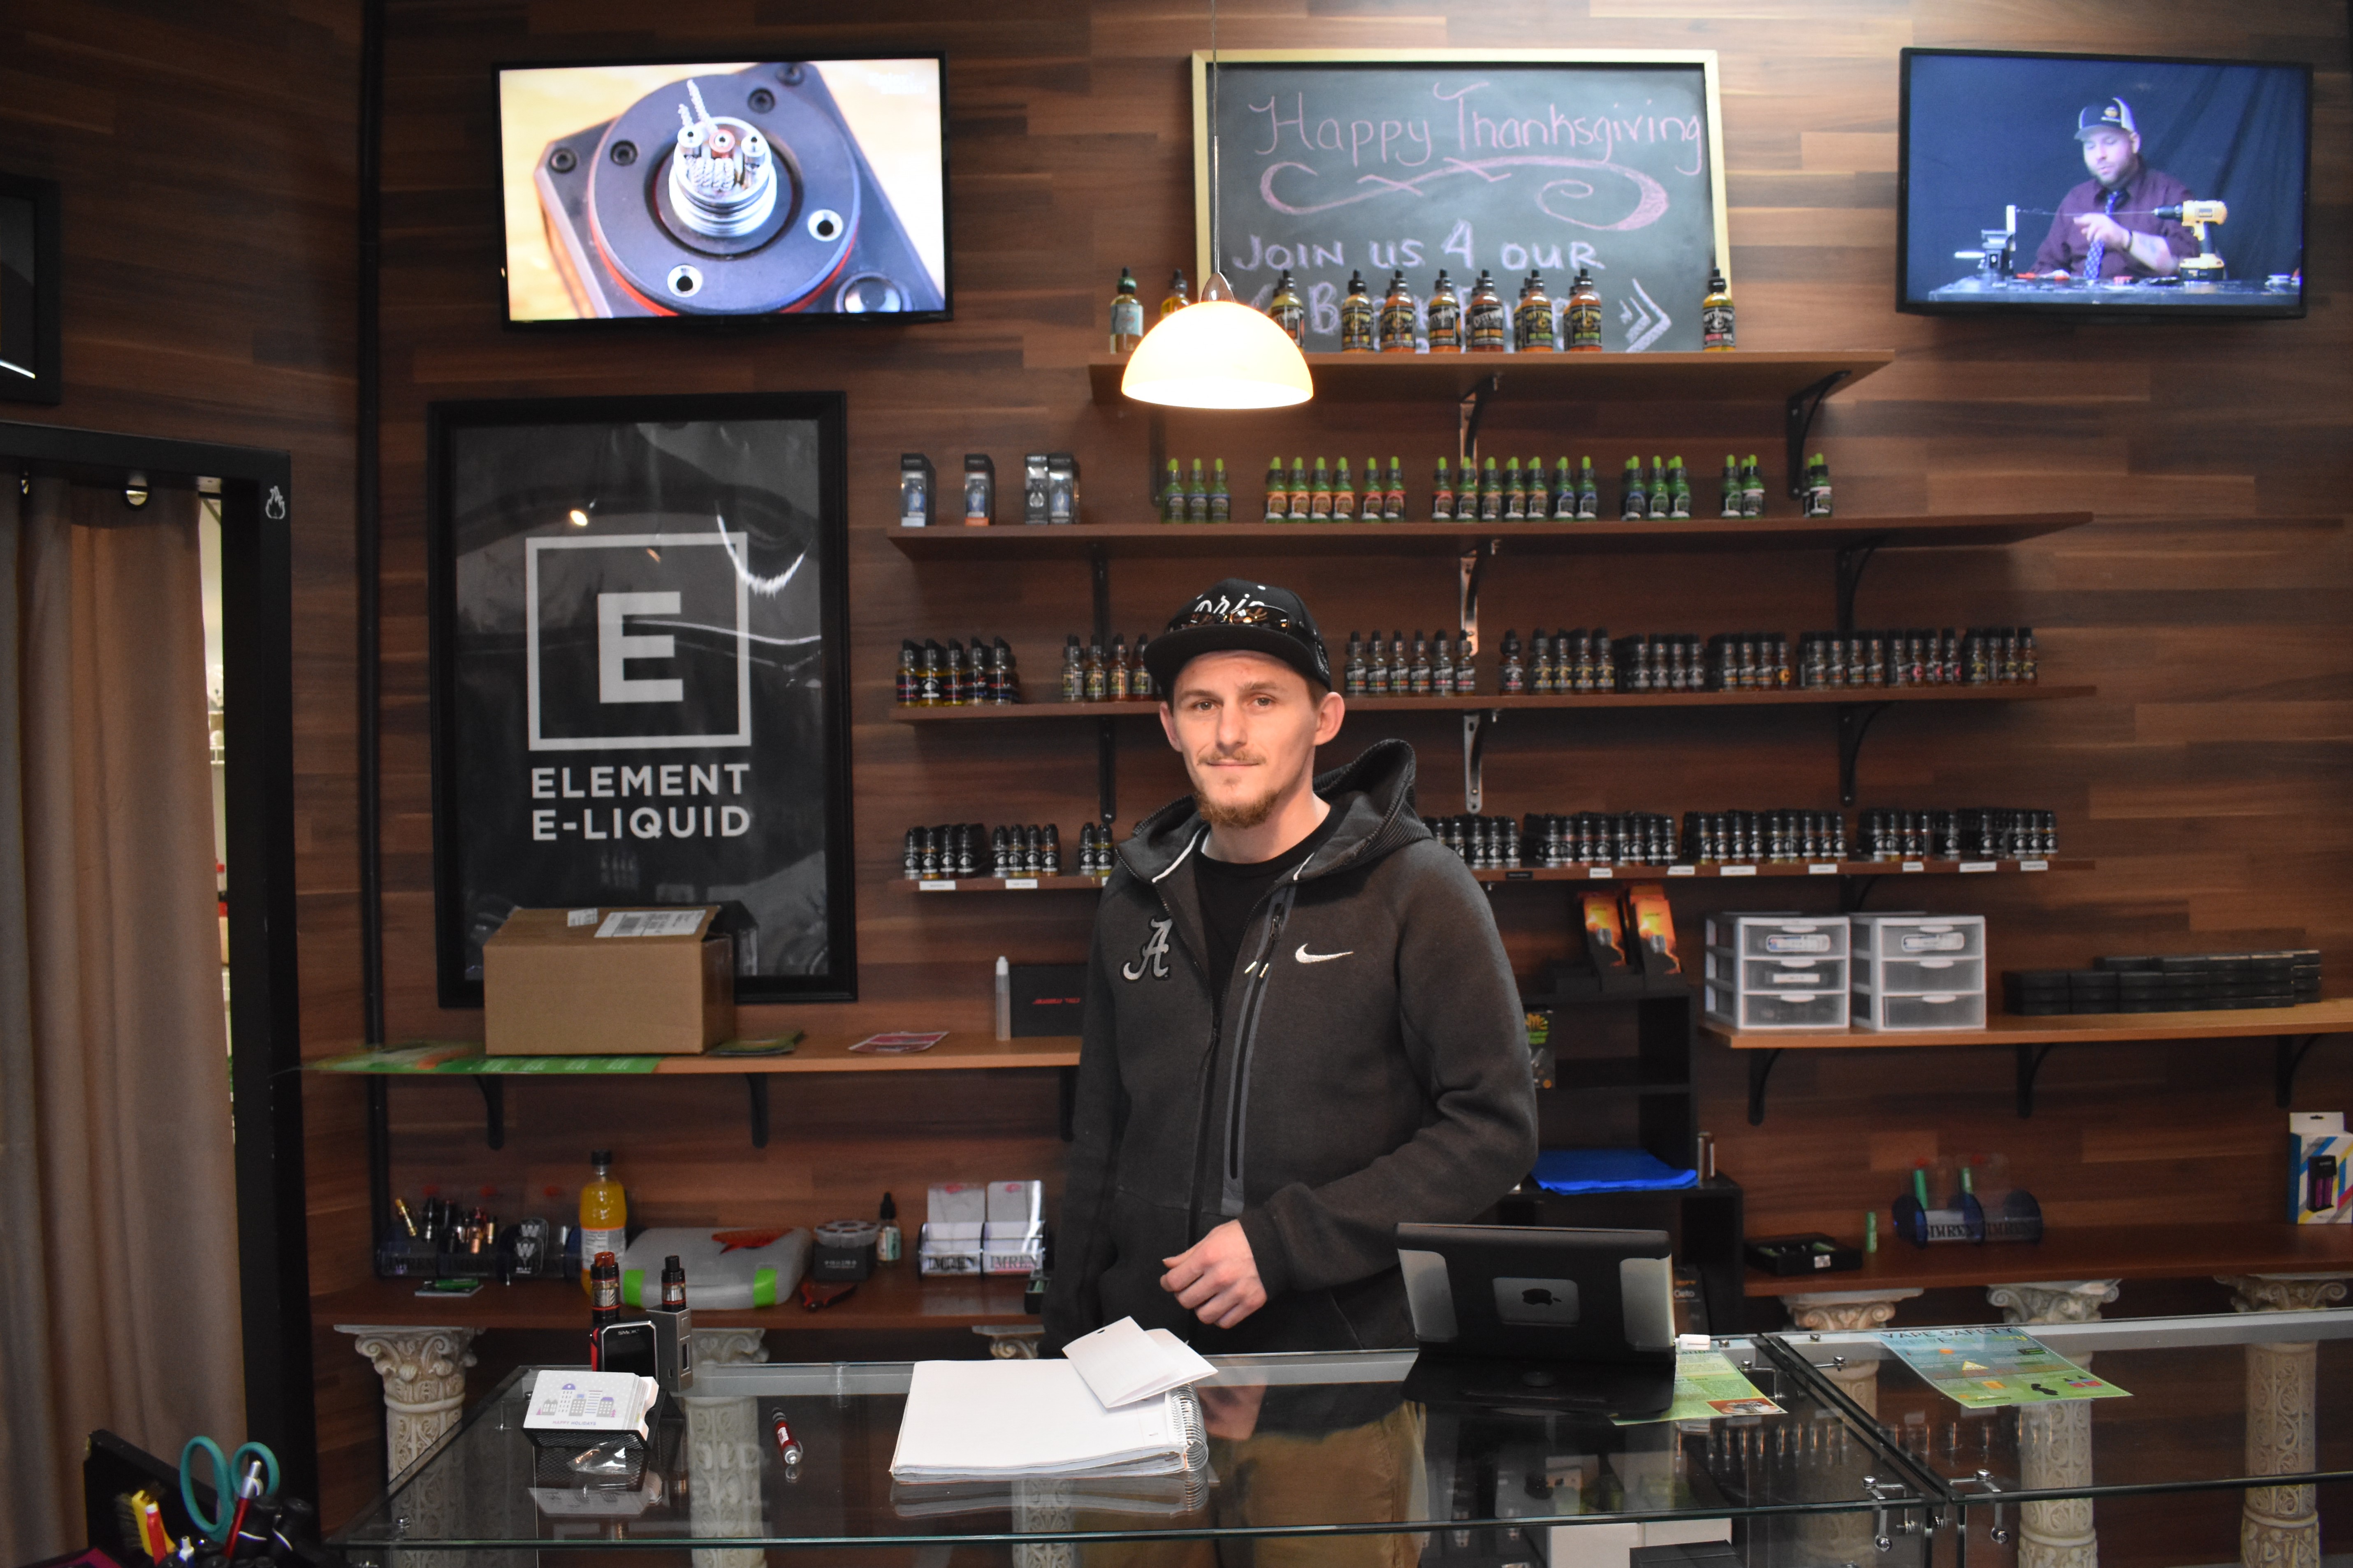 The Vape Loft is encouraging healthier lifestyles within the community